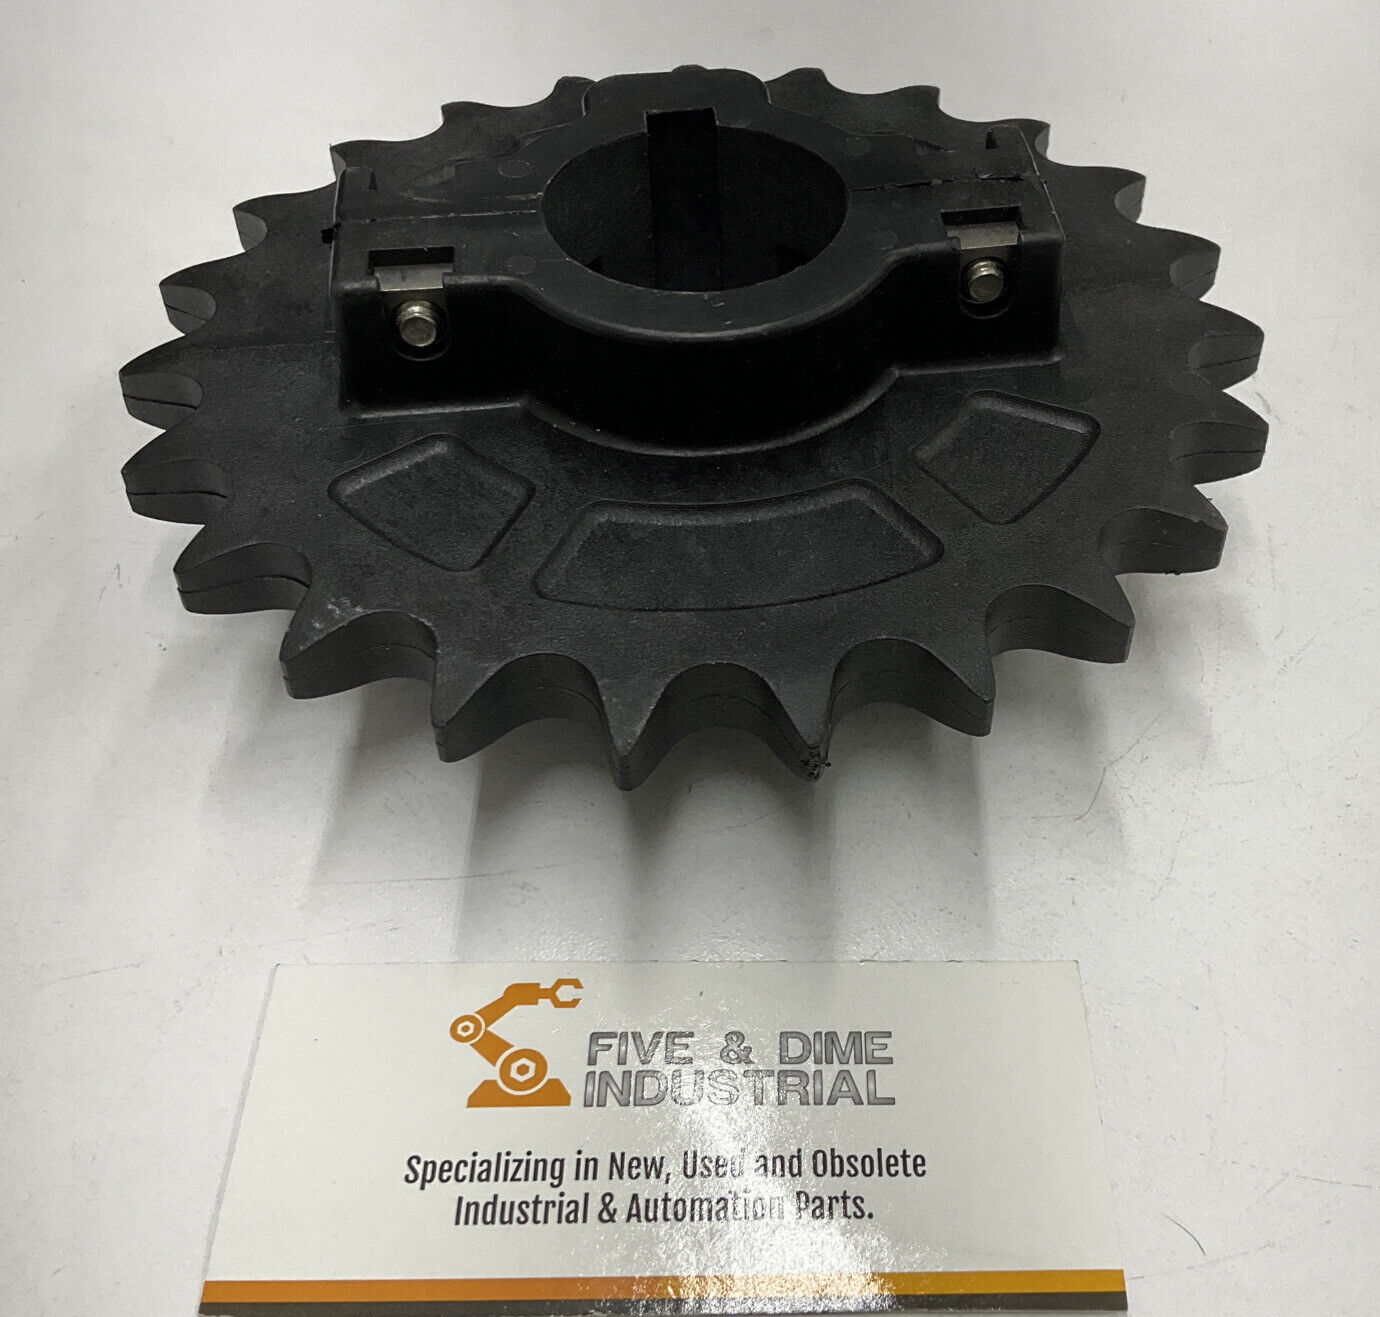 Rexnord 614-27 / 63-23T 2-Piece Sprocket 1-1/2" Bore (YE181) - 0